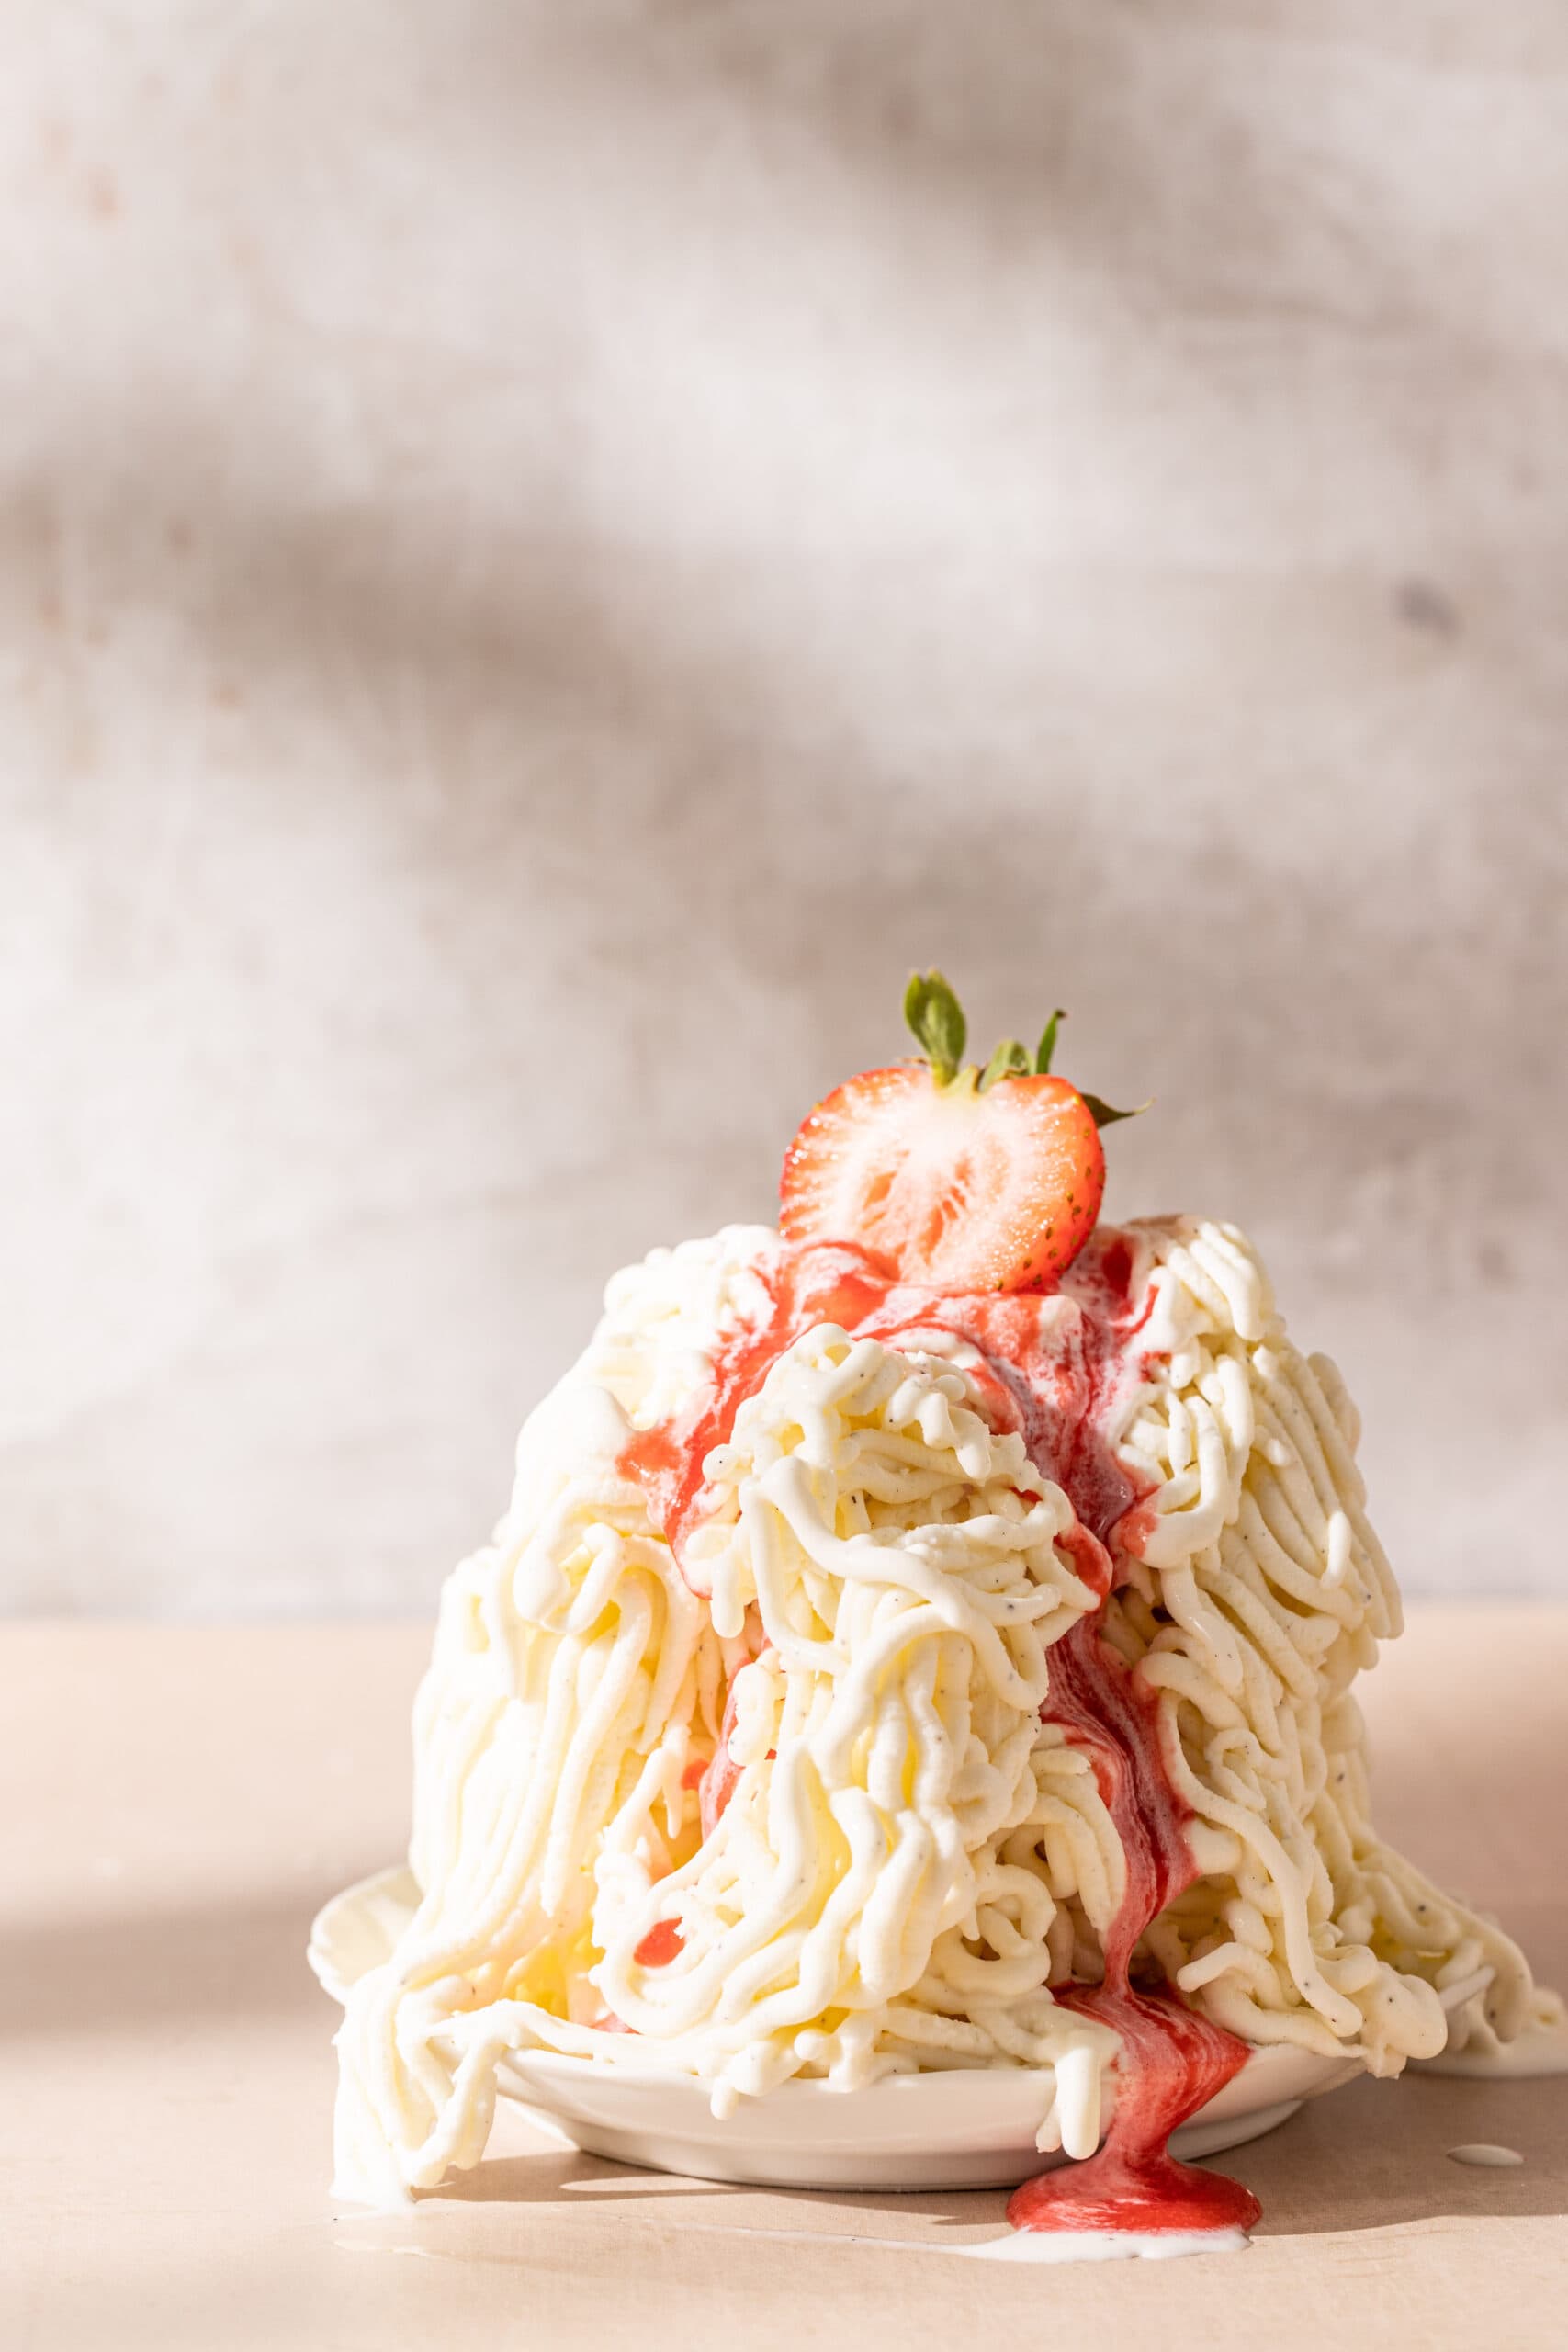 Pile of spaghettieis topped with strawberry sauce and a fresh strawberry.